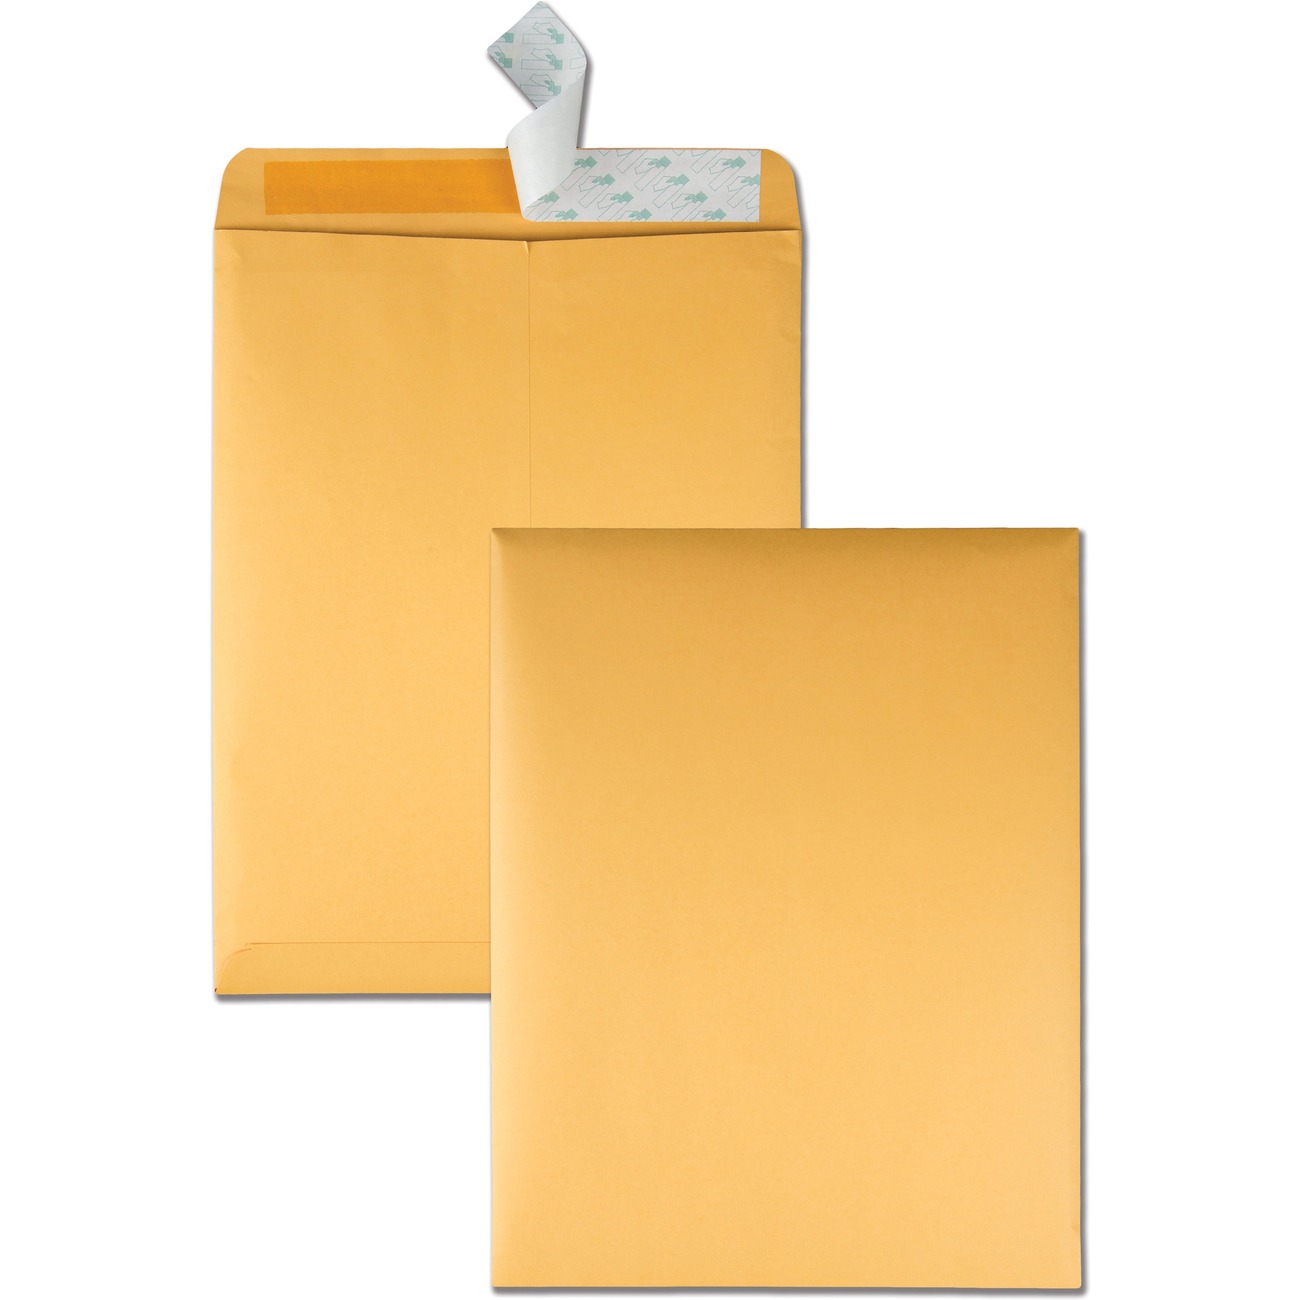 Quality Park 10 x 13 Catalog Envelopes with Self-Seal Closure | Butler ...